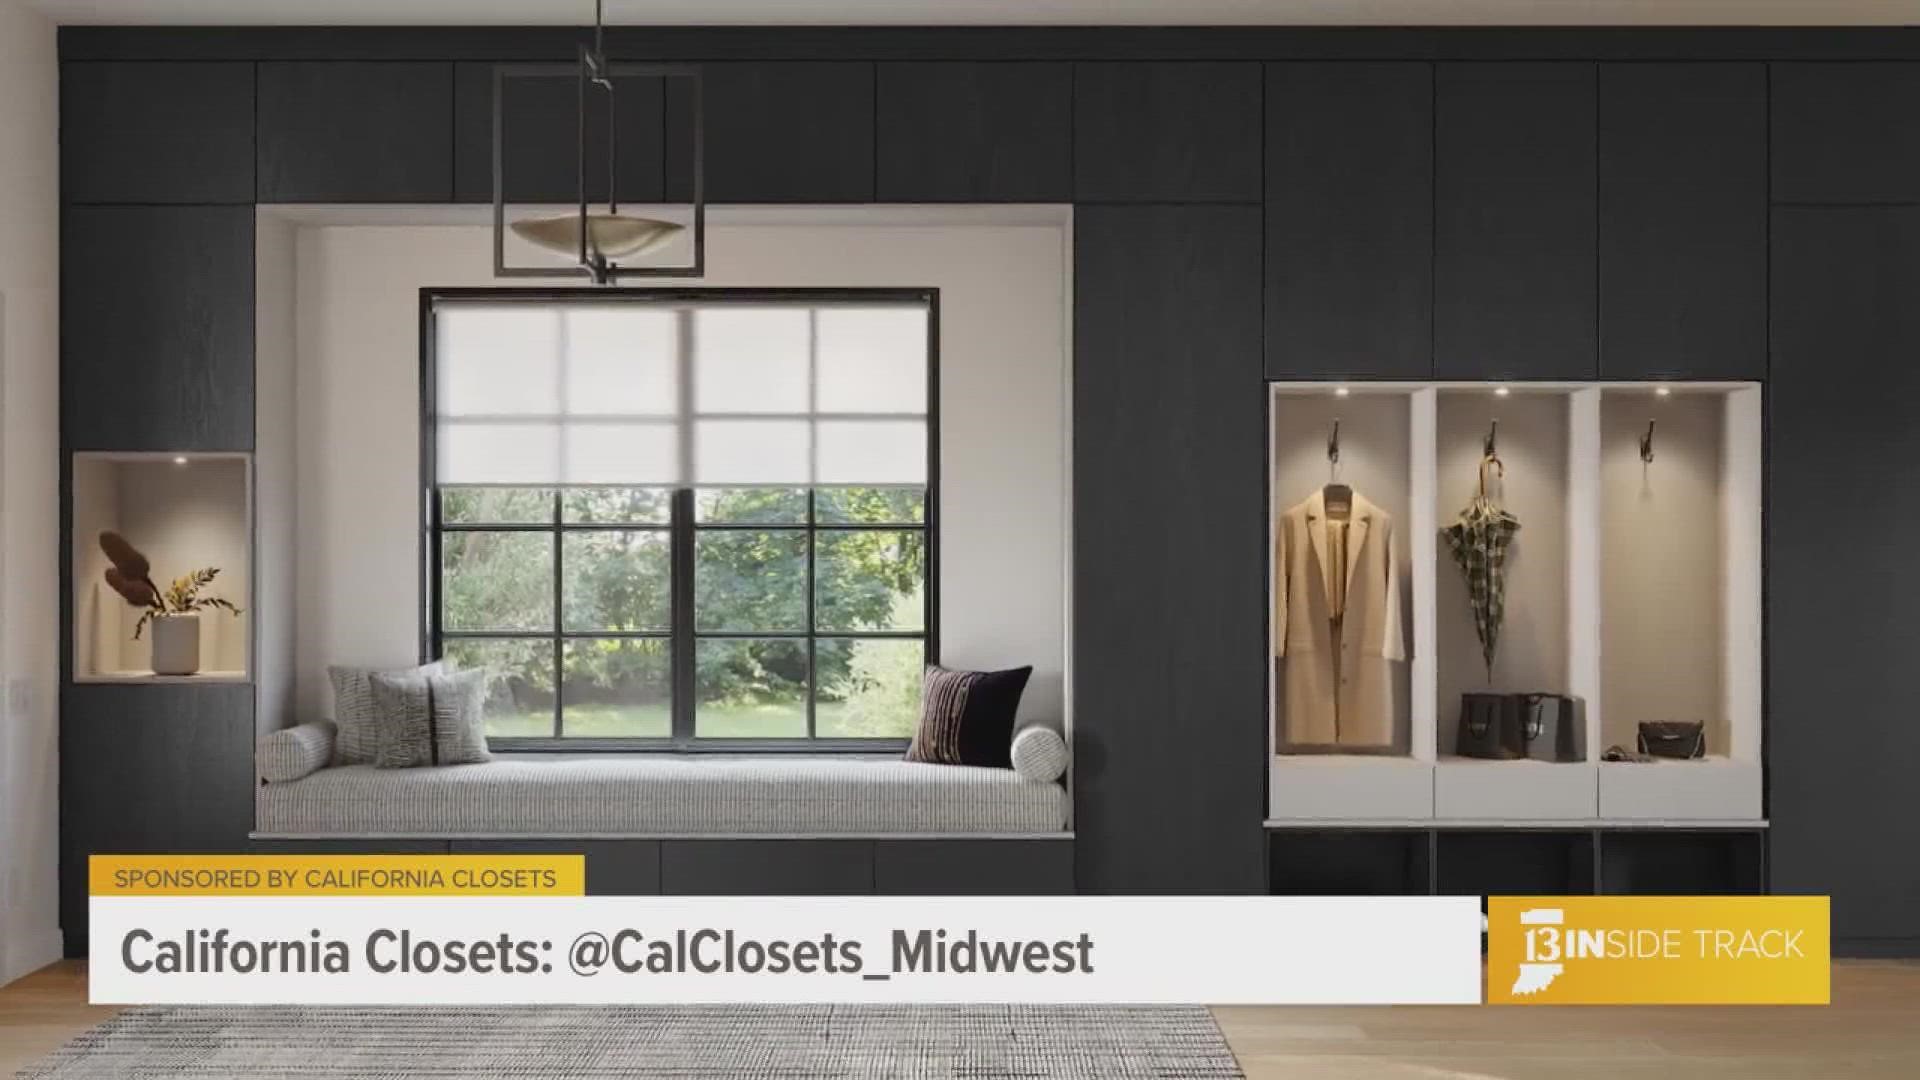 California Closets can help design other spaces including garages, pantries, mudrooms, offices, libraries, and, of course, closets.